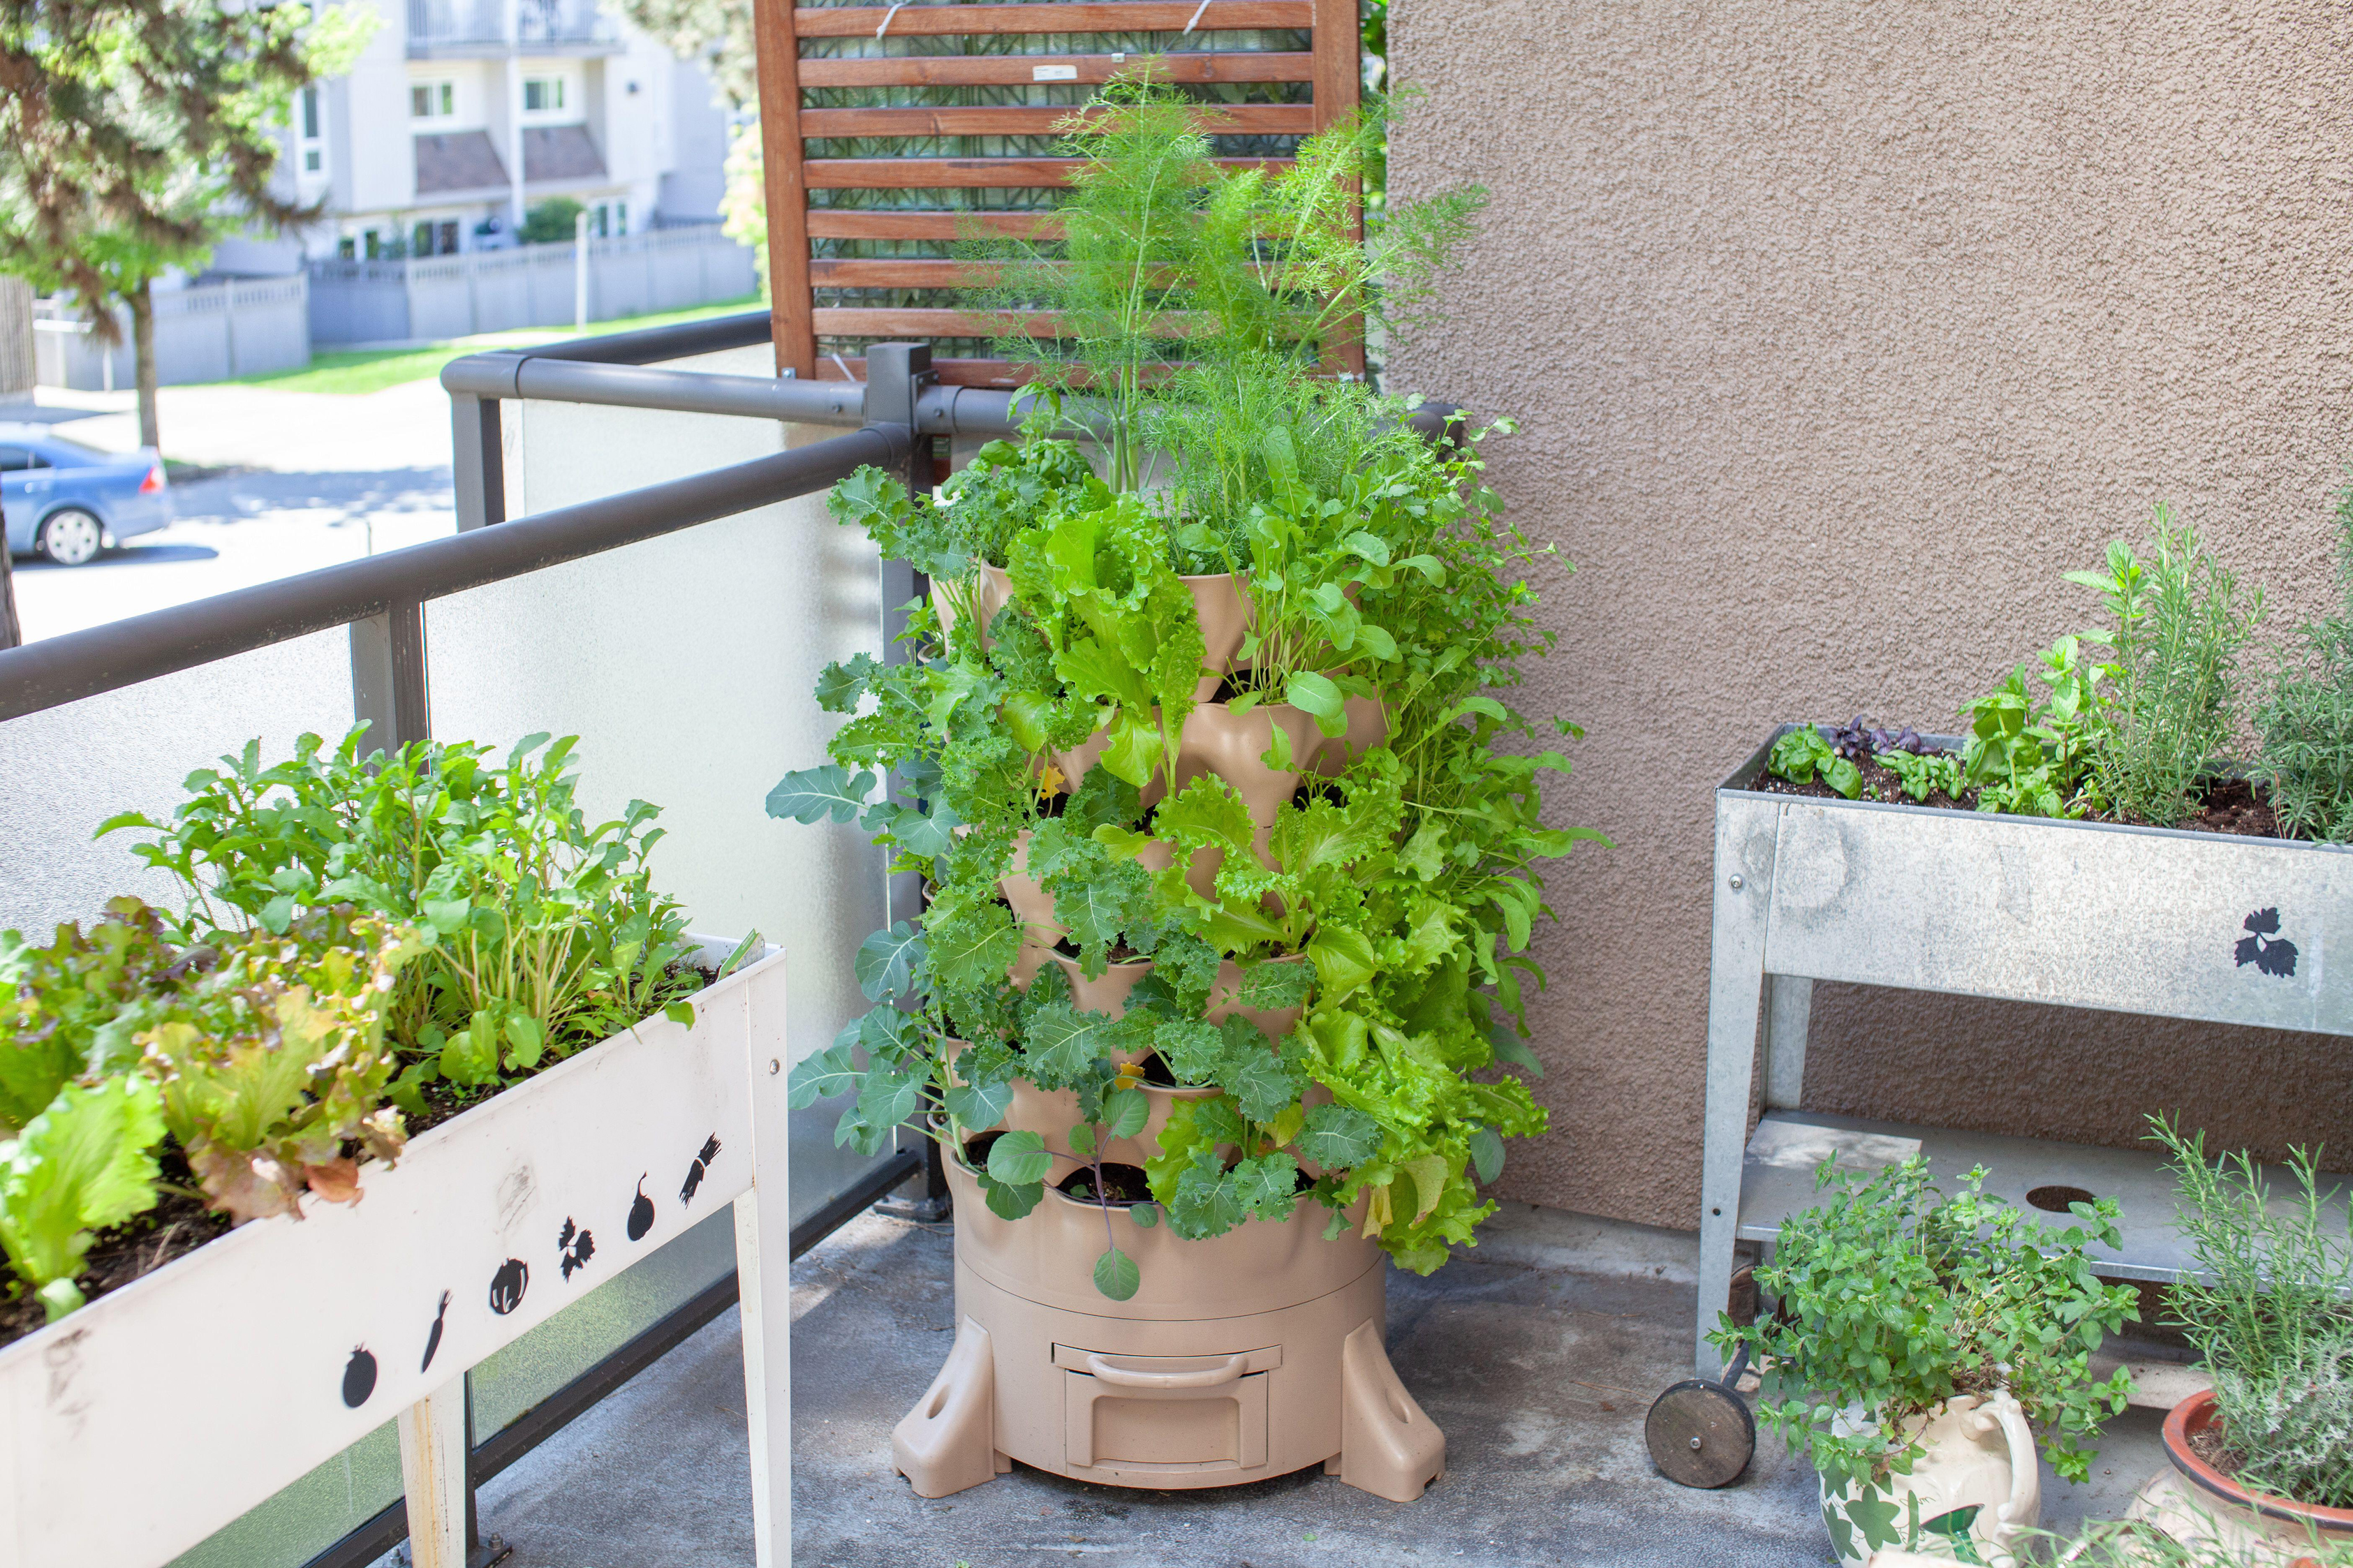 Salad leaves in containers on a balcony (Alamy/PA)